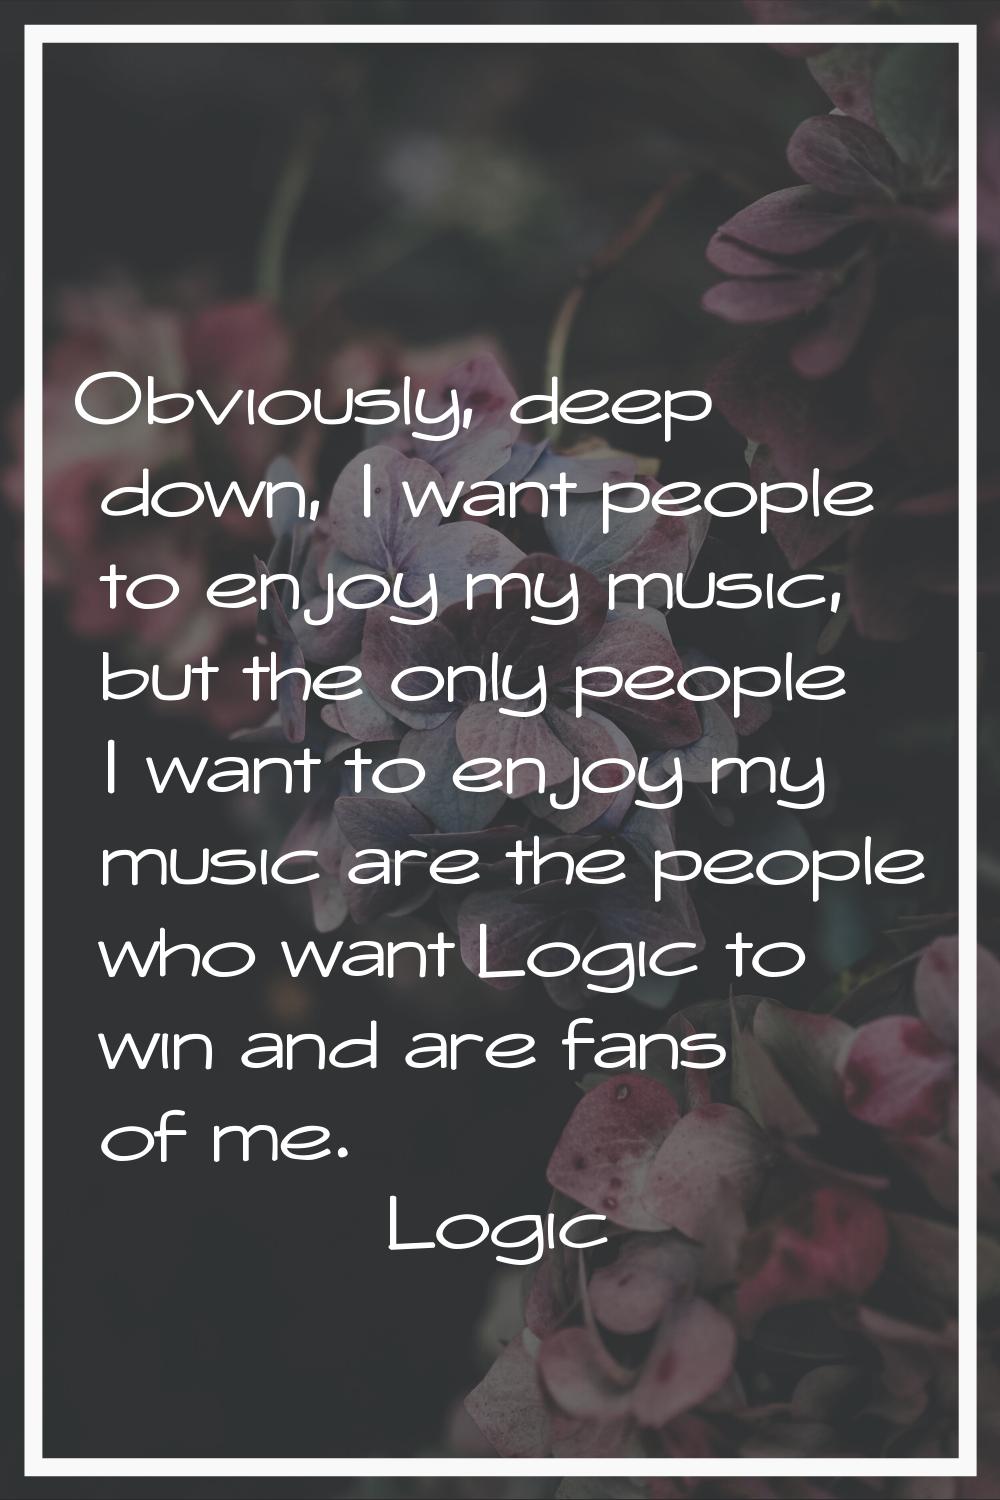 Obviously, deep down, I want people to enjoy my music, but the only people I want to enjoy my music